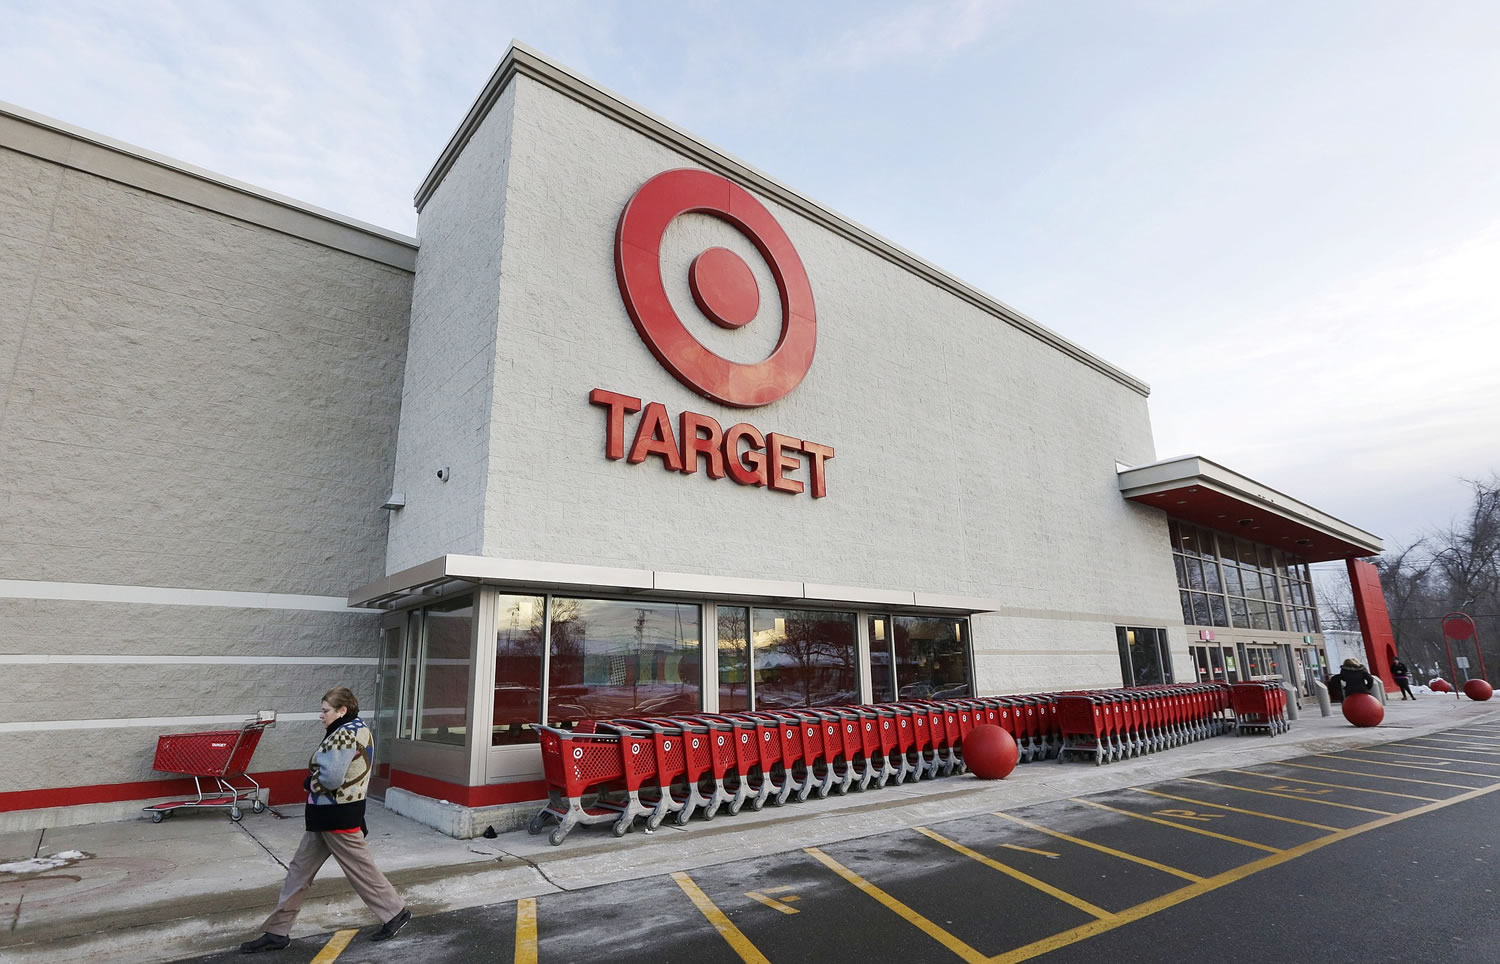 Associated Press files
A passer-by walks near an entrance to a Target retail store in Watertown, Mass.